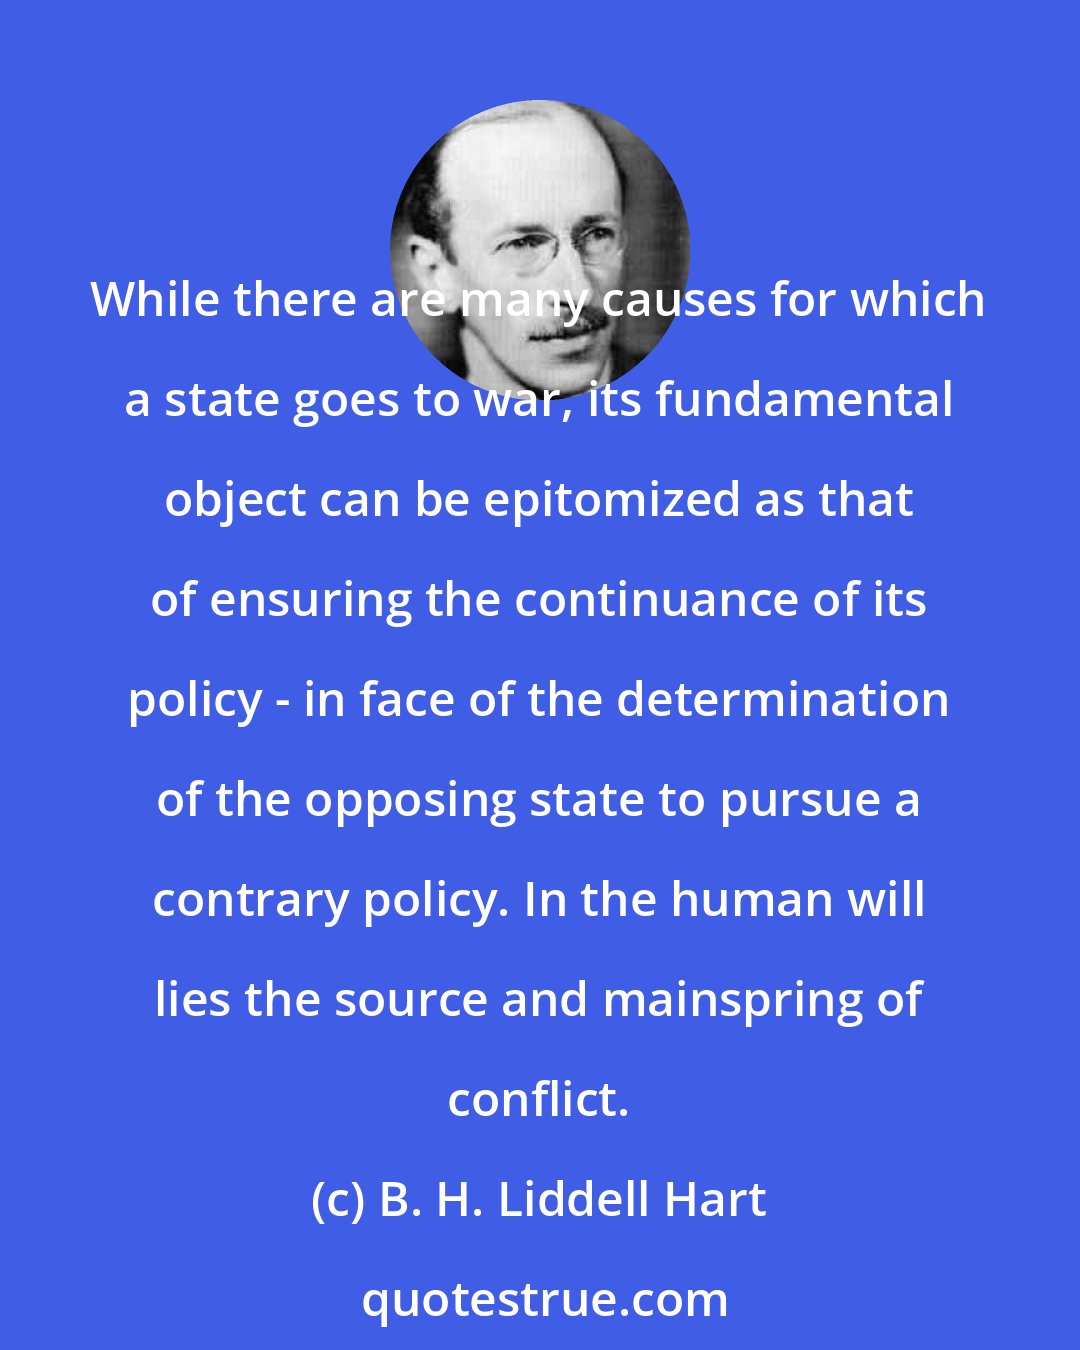 B. H. Liddell Hart: While there are many causes for which a state goes to war, its fundamental object can be epitomized as that of ensuring the continuance of its policy - in face of the determination of the opposing state to pursue a contrary policy. In the human will lies the source and mainspring of conflict.